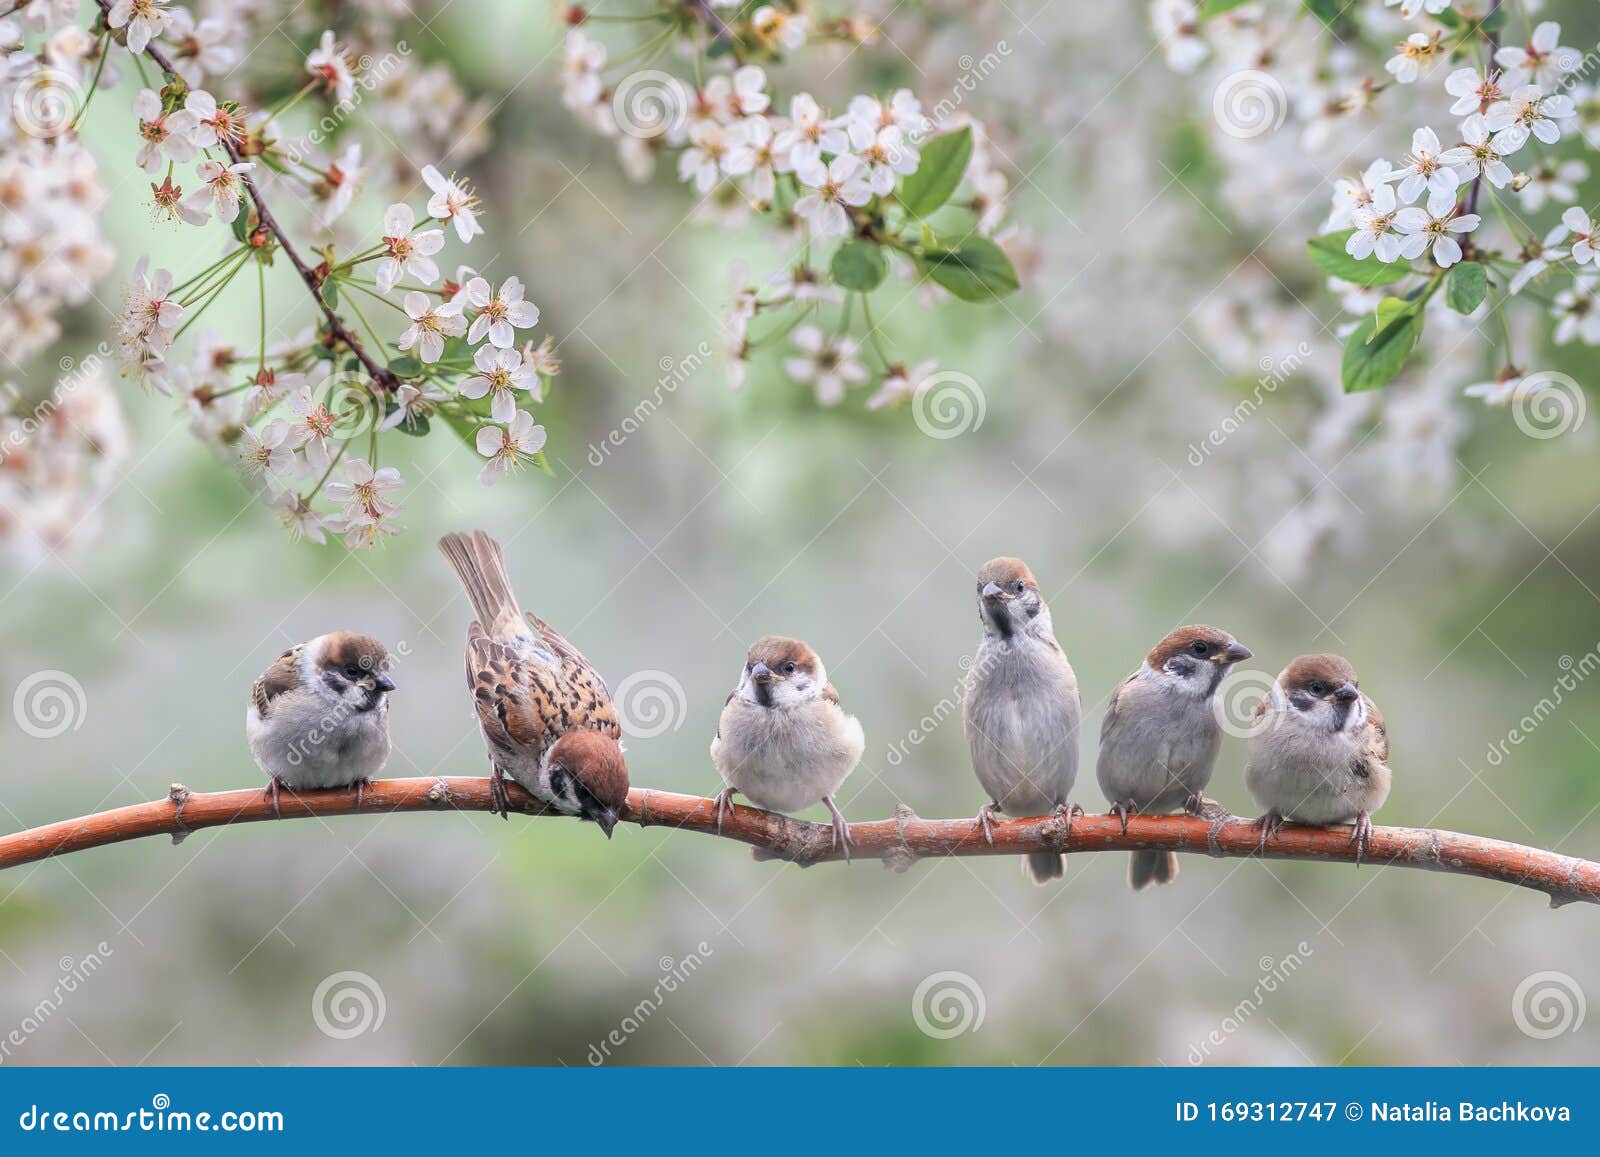 natural background with small birds on a branch white cherry blossoms in the may garden